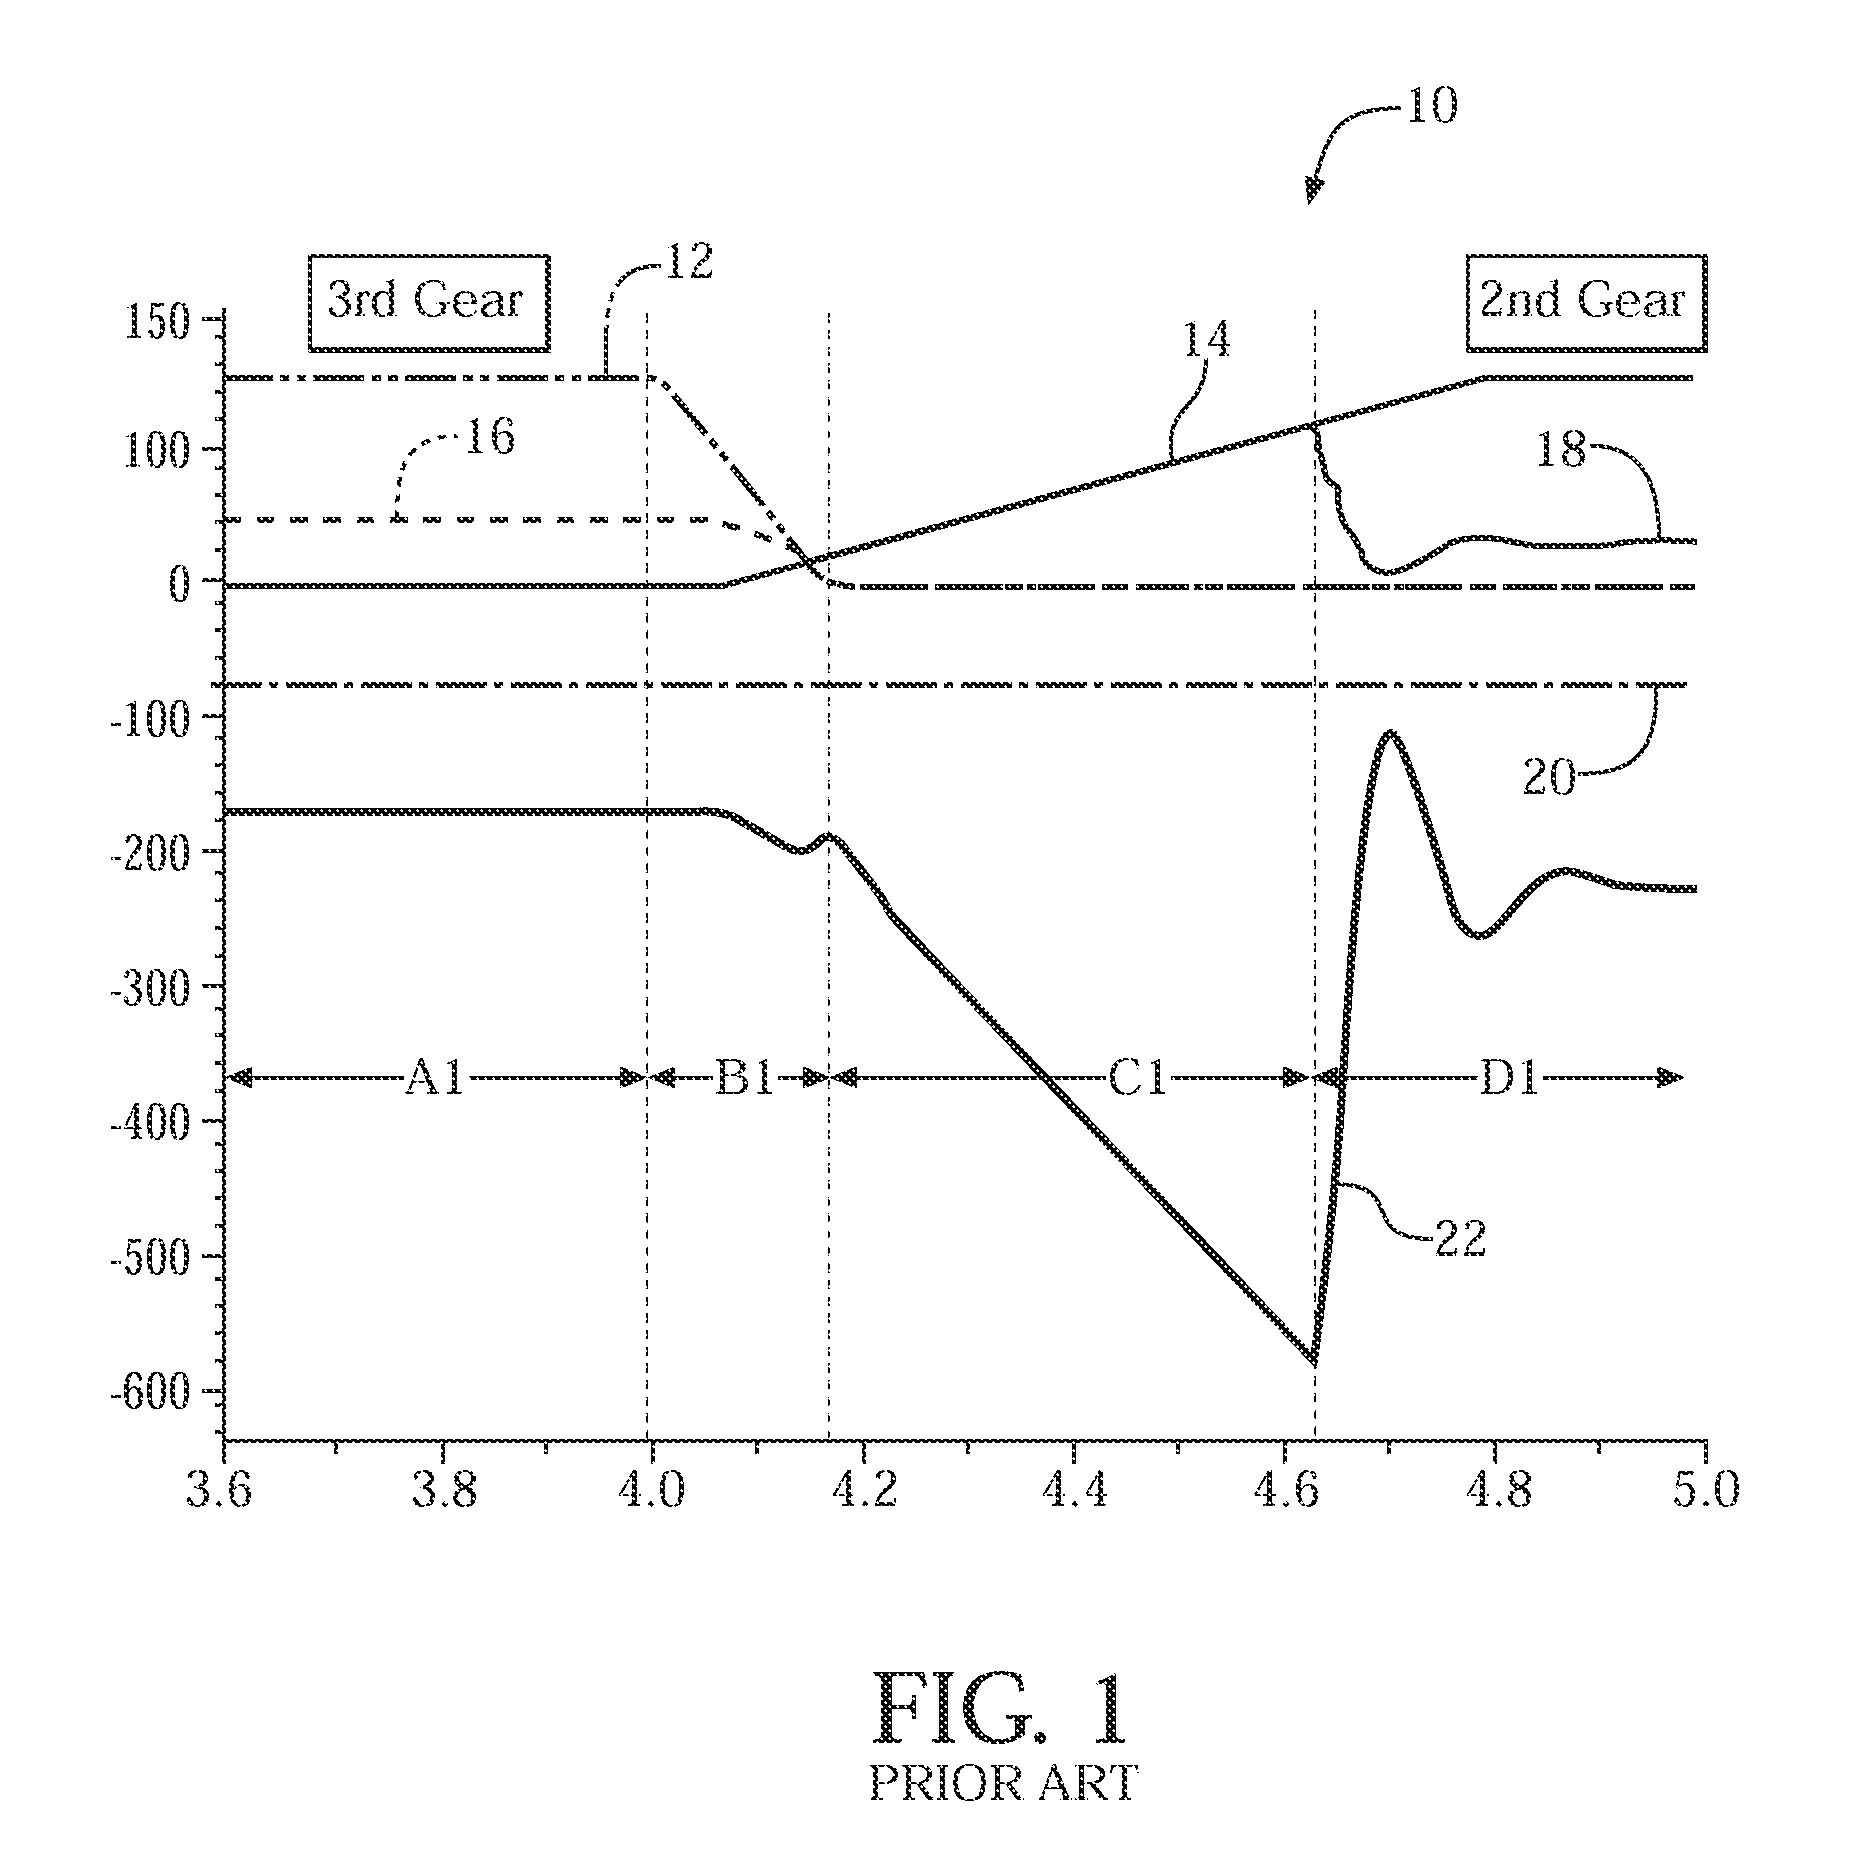 Motor-assist shift control in a hybrid vehicle transmission